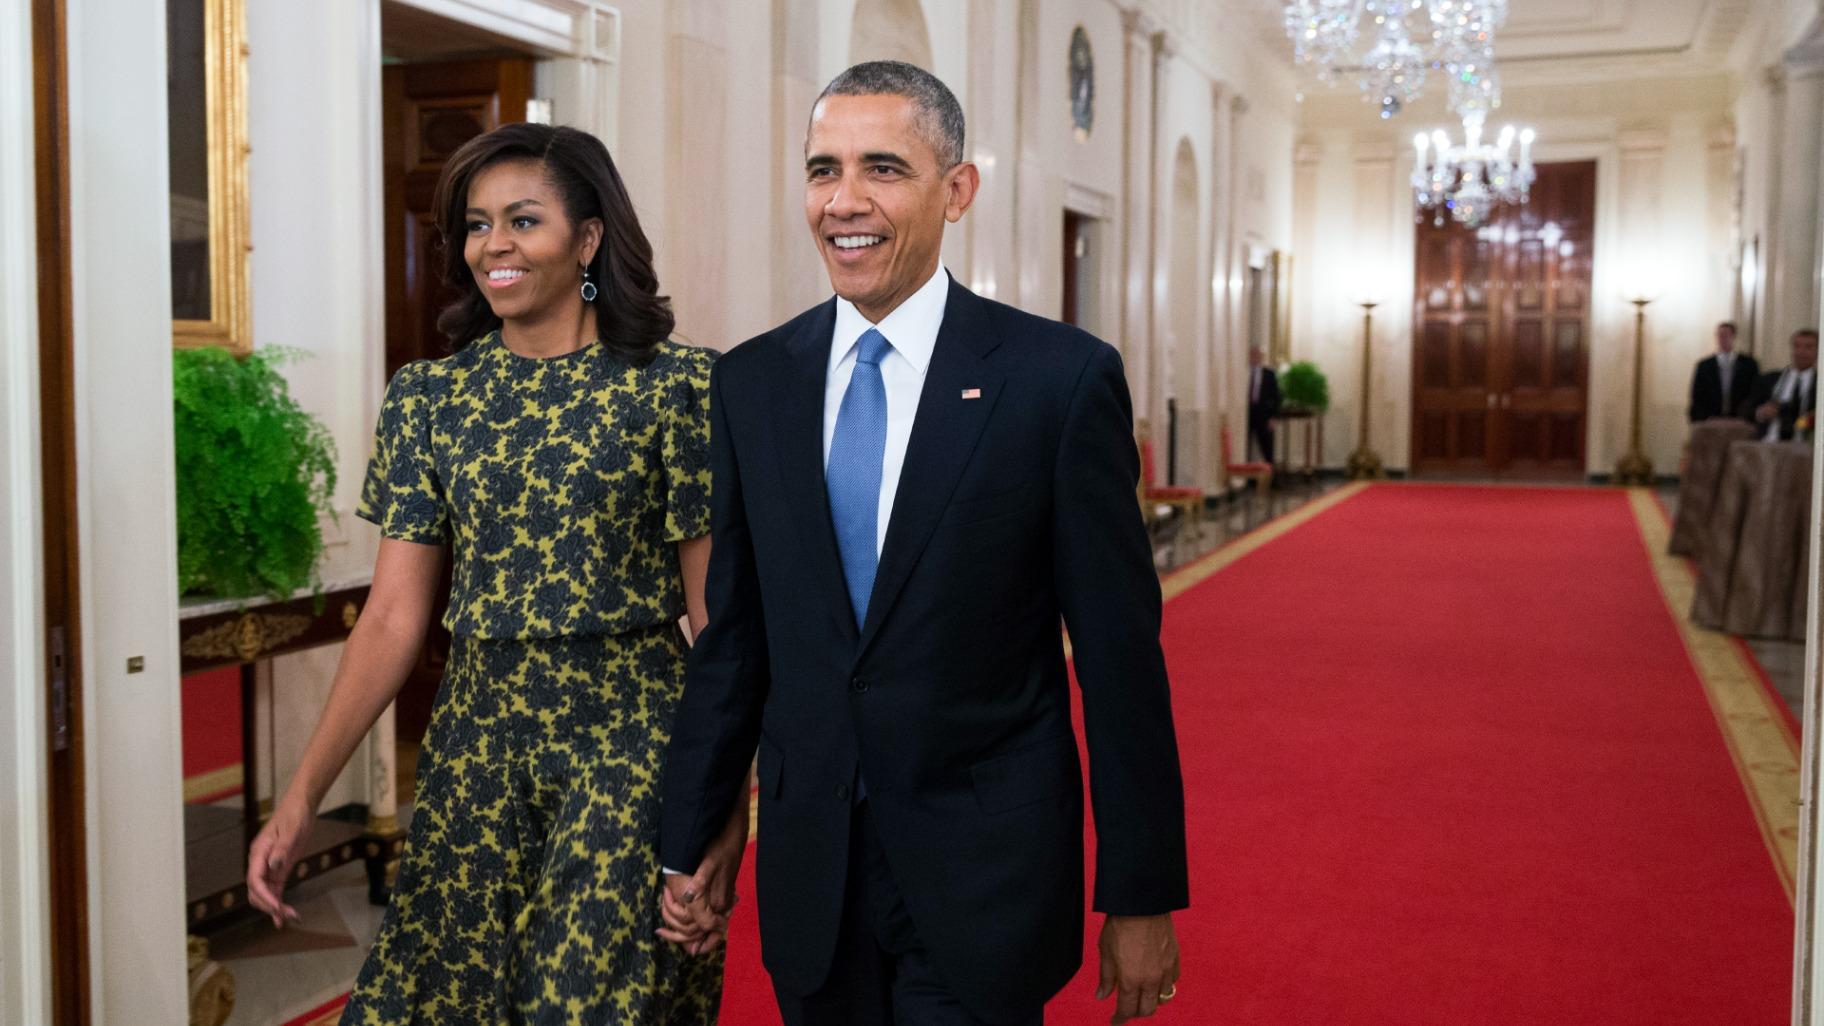 First lady Michelle Obama, and President Barack Obama arrive for the Presidential Medal of Freedom ceremony in the East Room of the White House, on Tuesday, Nov. 24, 2015, in Washington. (AP Photo / Evan Vucci, File)